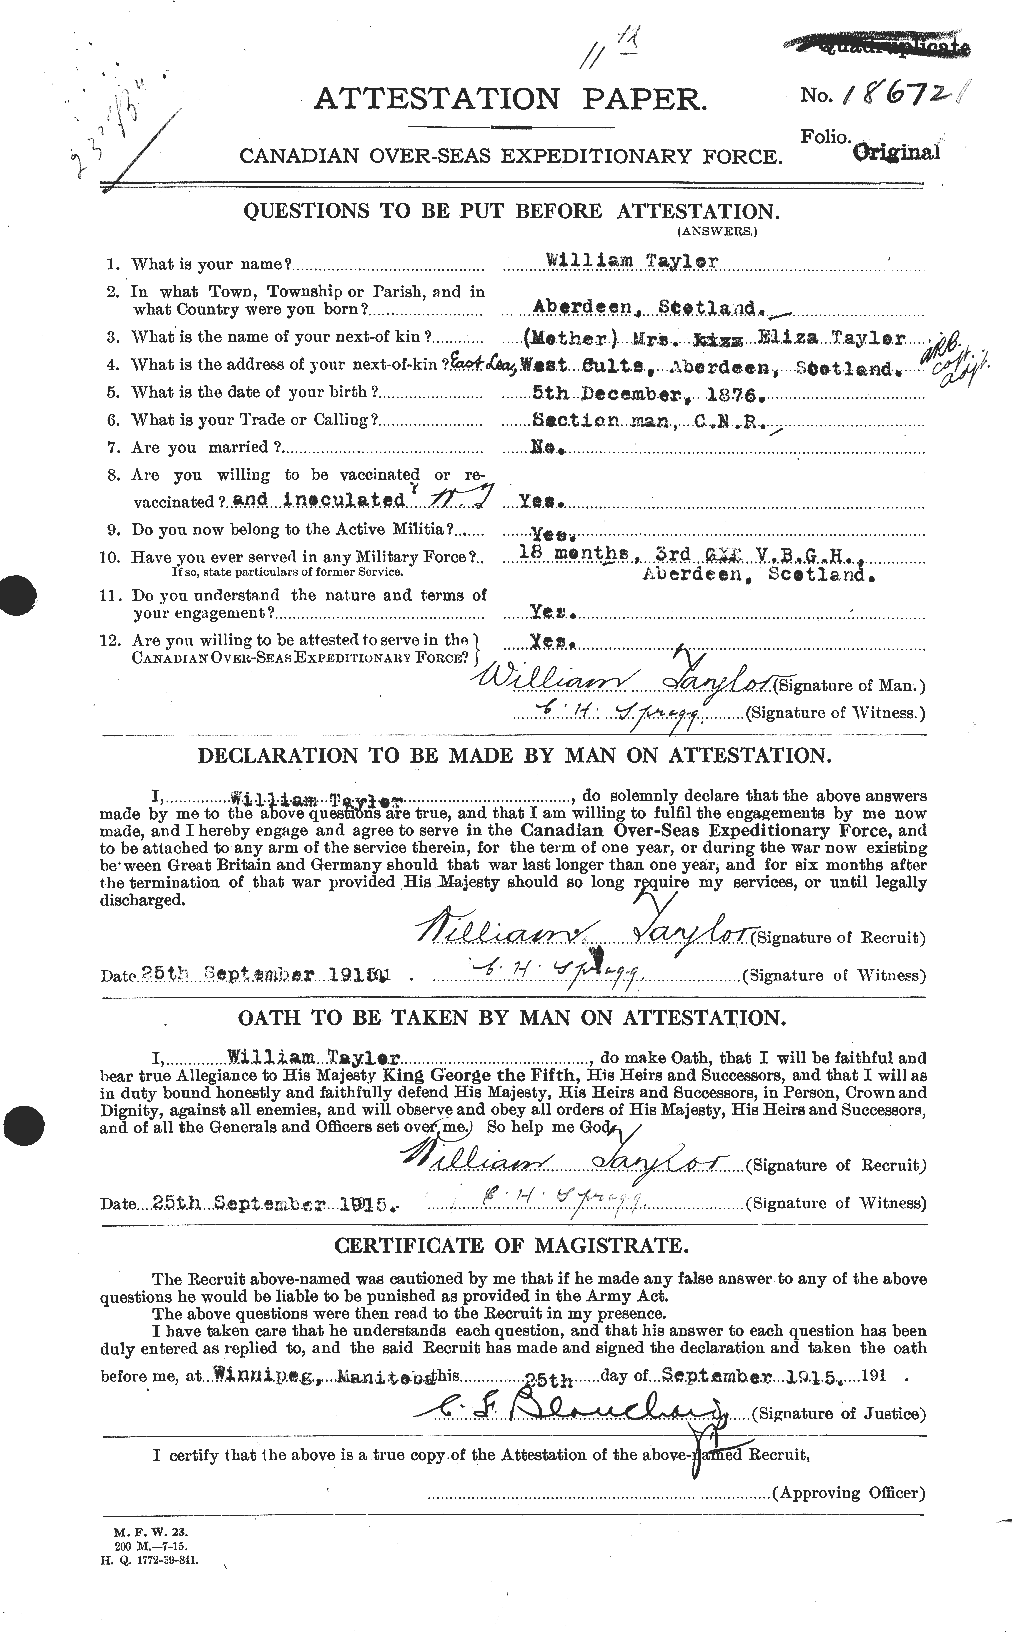 Personnel Records of the First World War - CEF 628133a